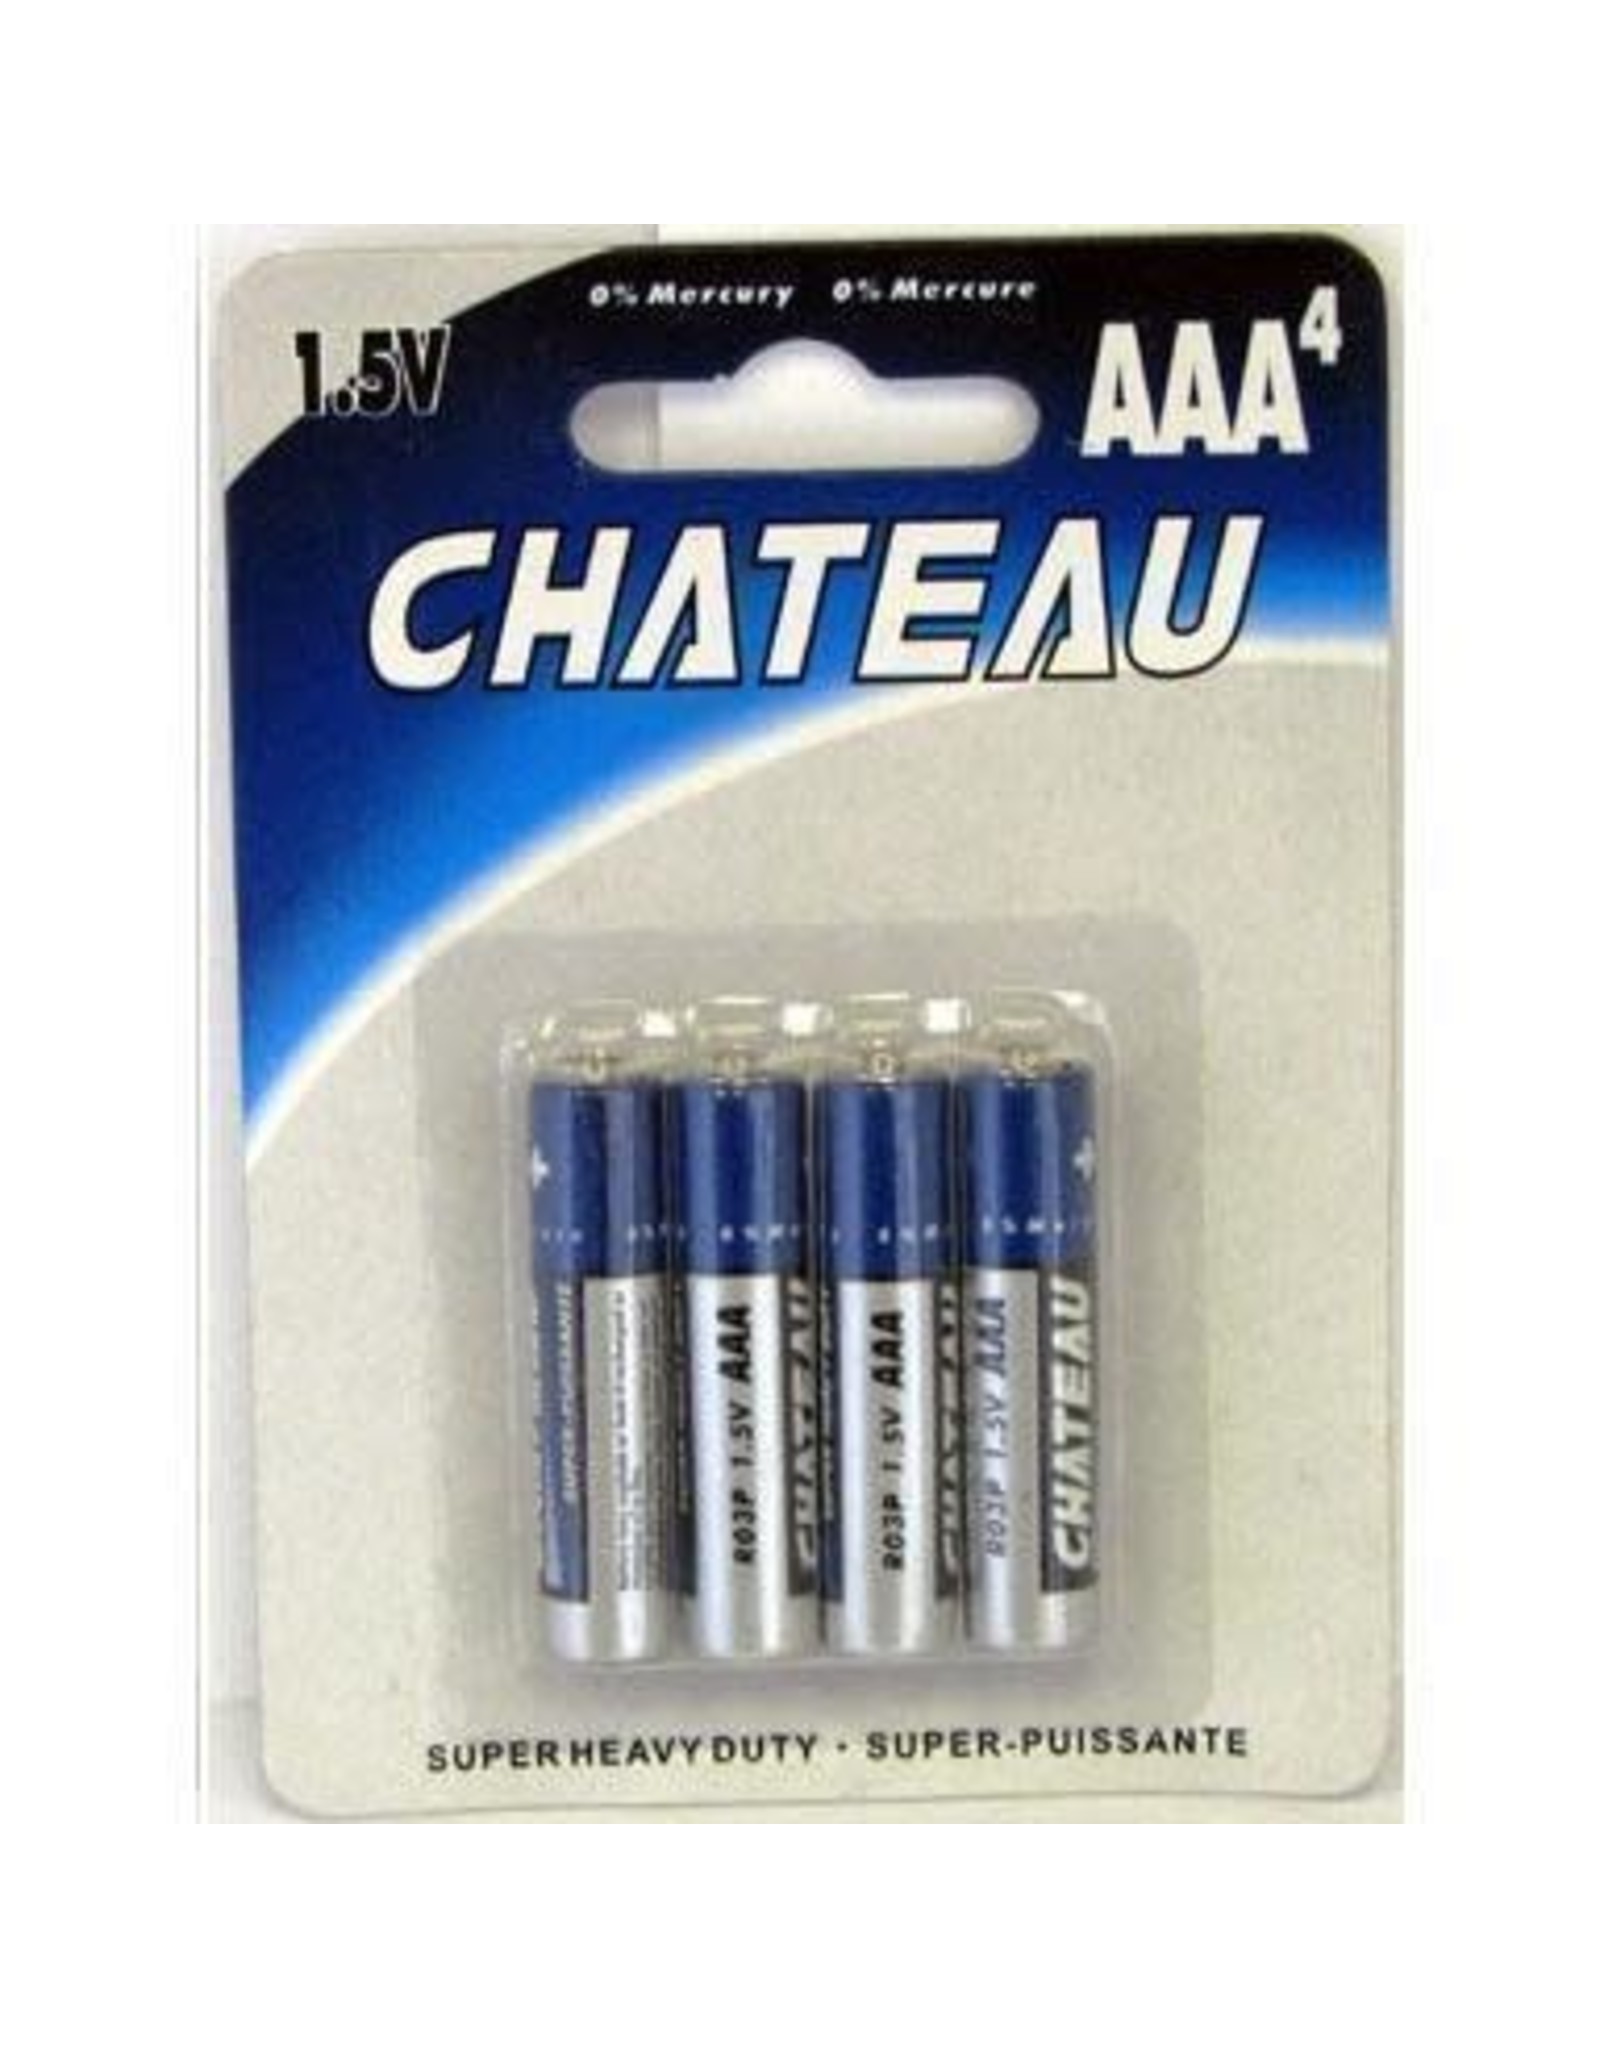 Chateau AAA - 4 Pack Batteries